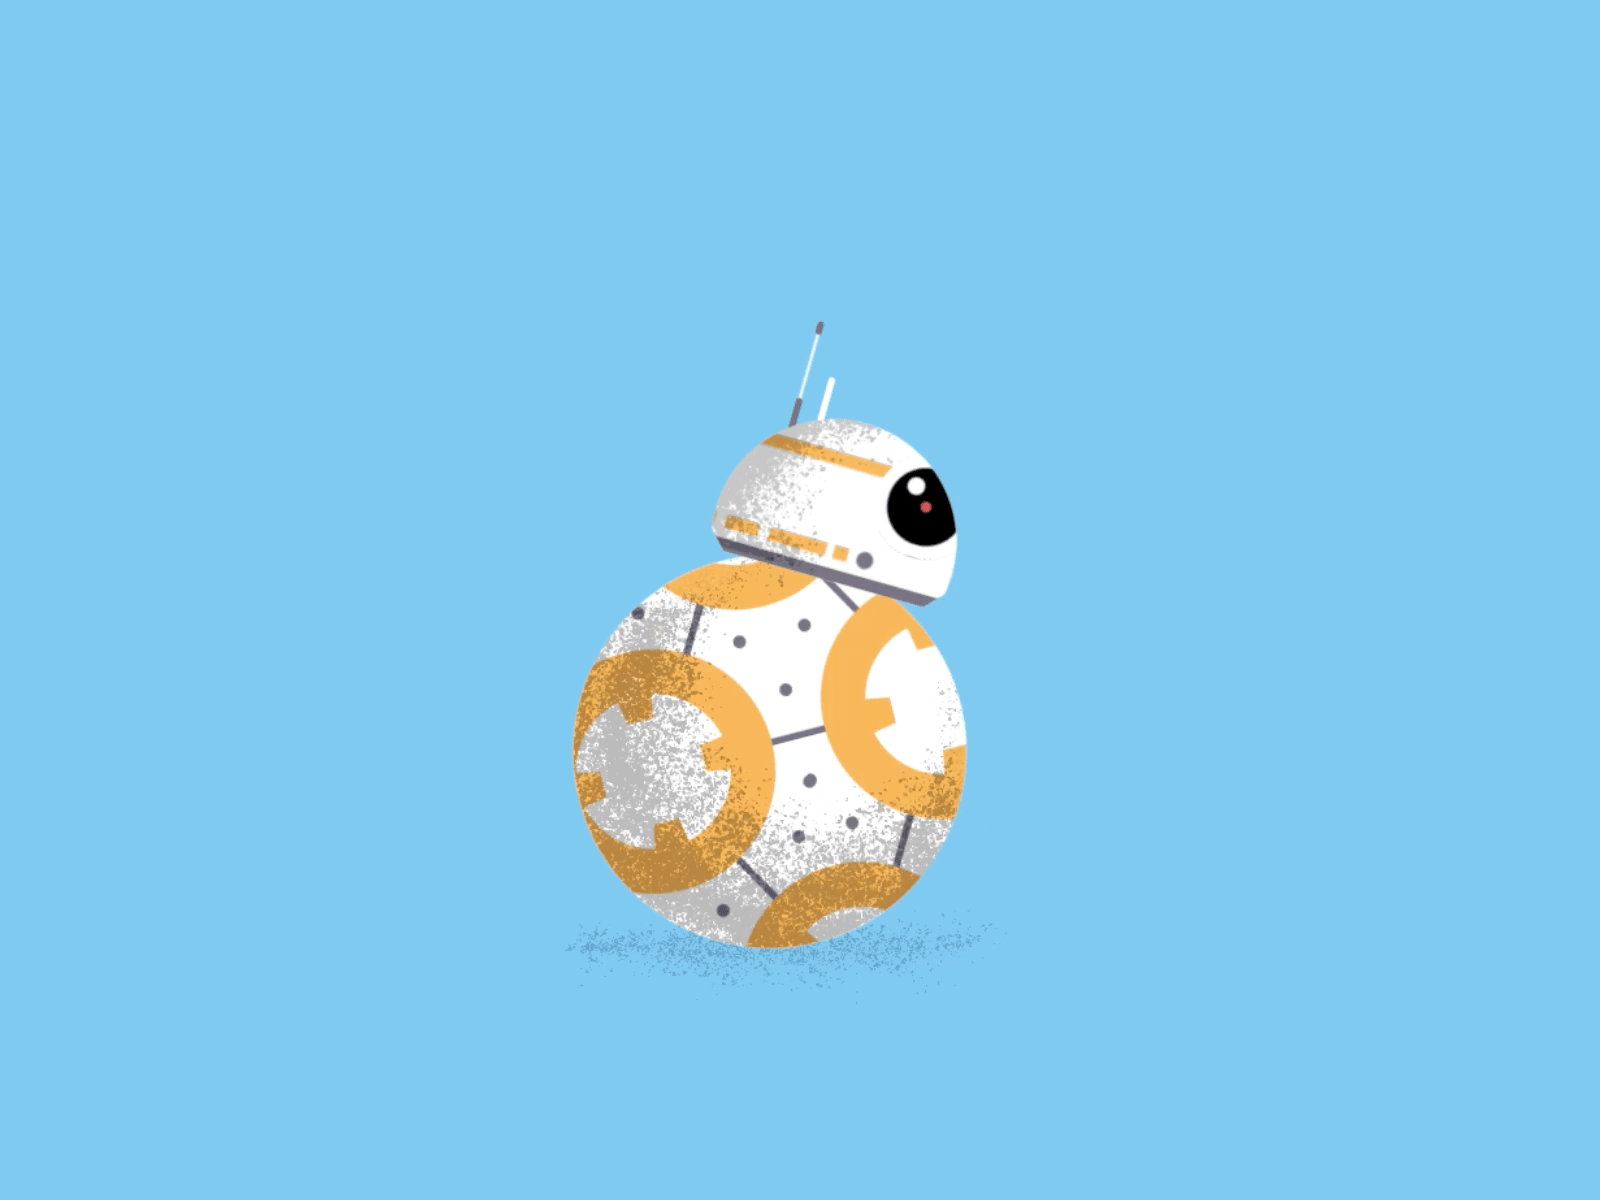 BB8 rollin around after effects animation bb8 character design character rig chewbacca chewie droids illustration loop motion motion design porgs r2d2 star wars